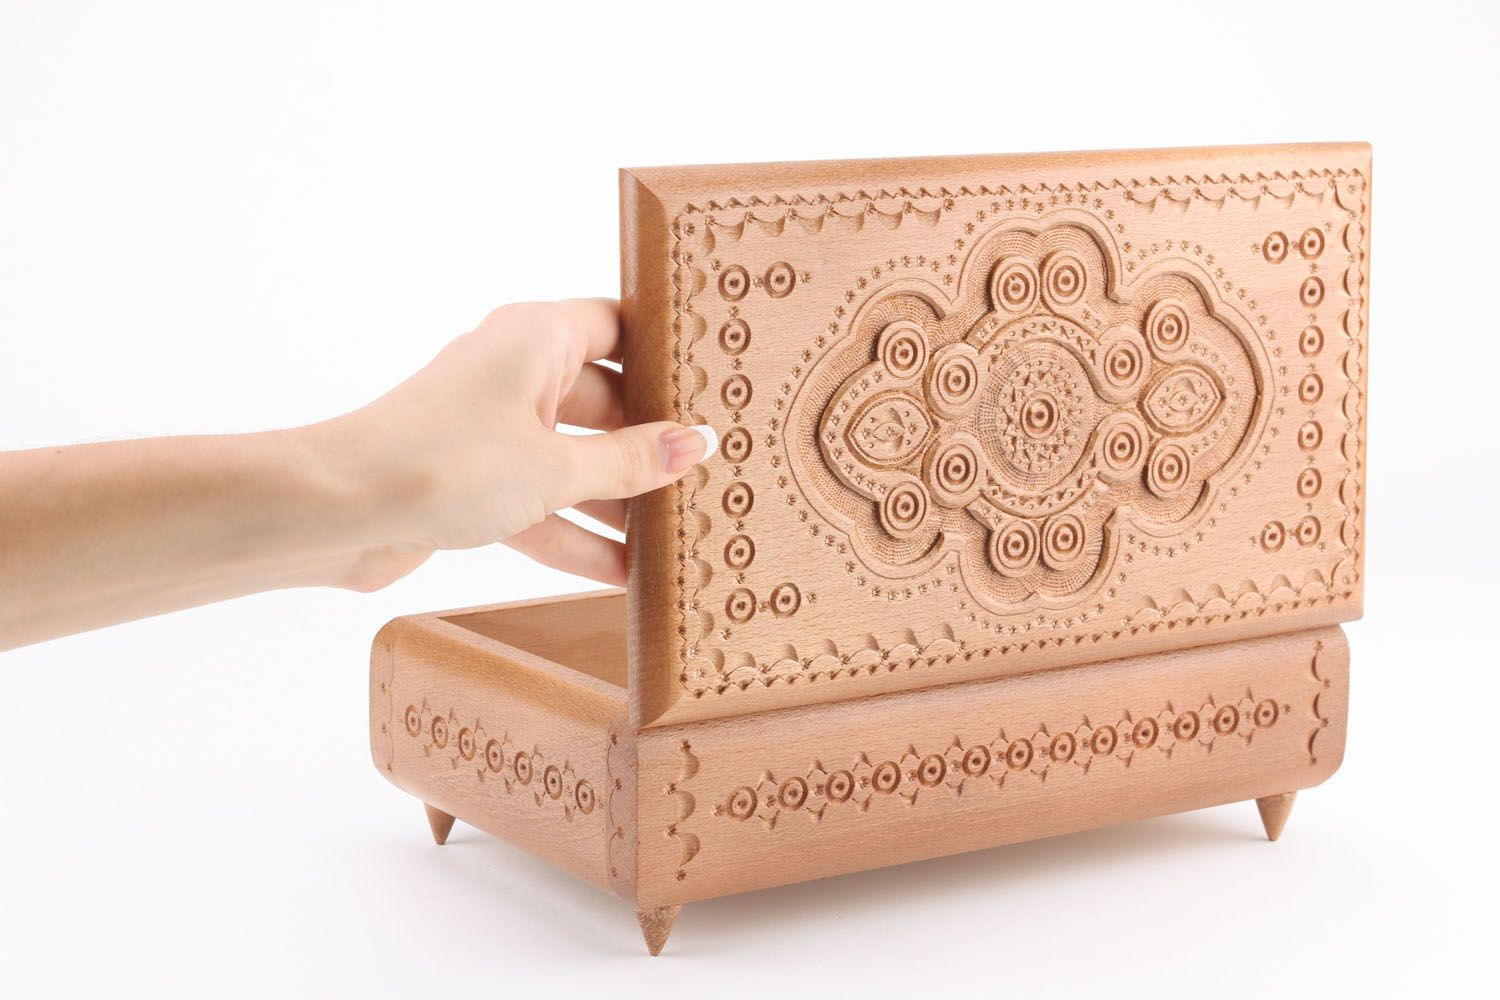 Homemade carved wooden box photo 2